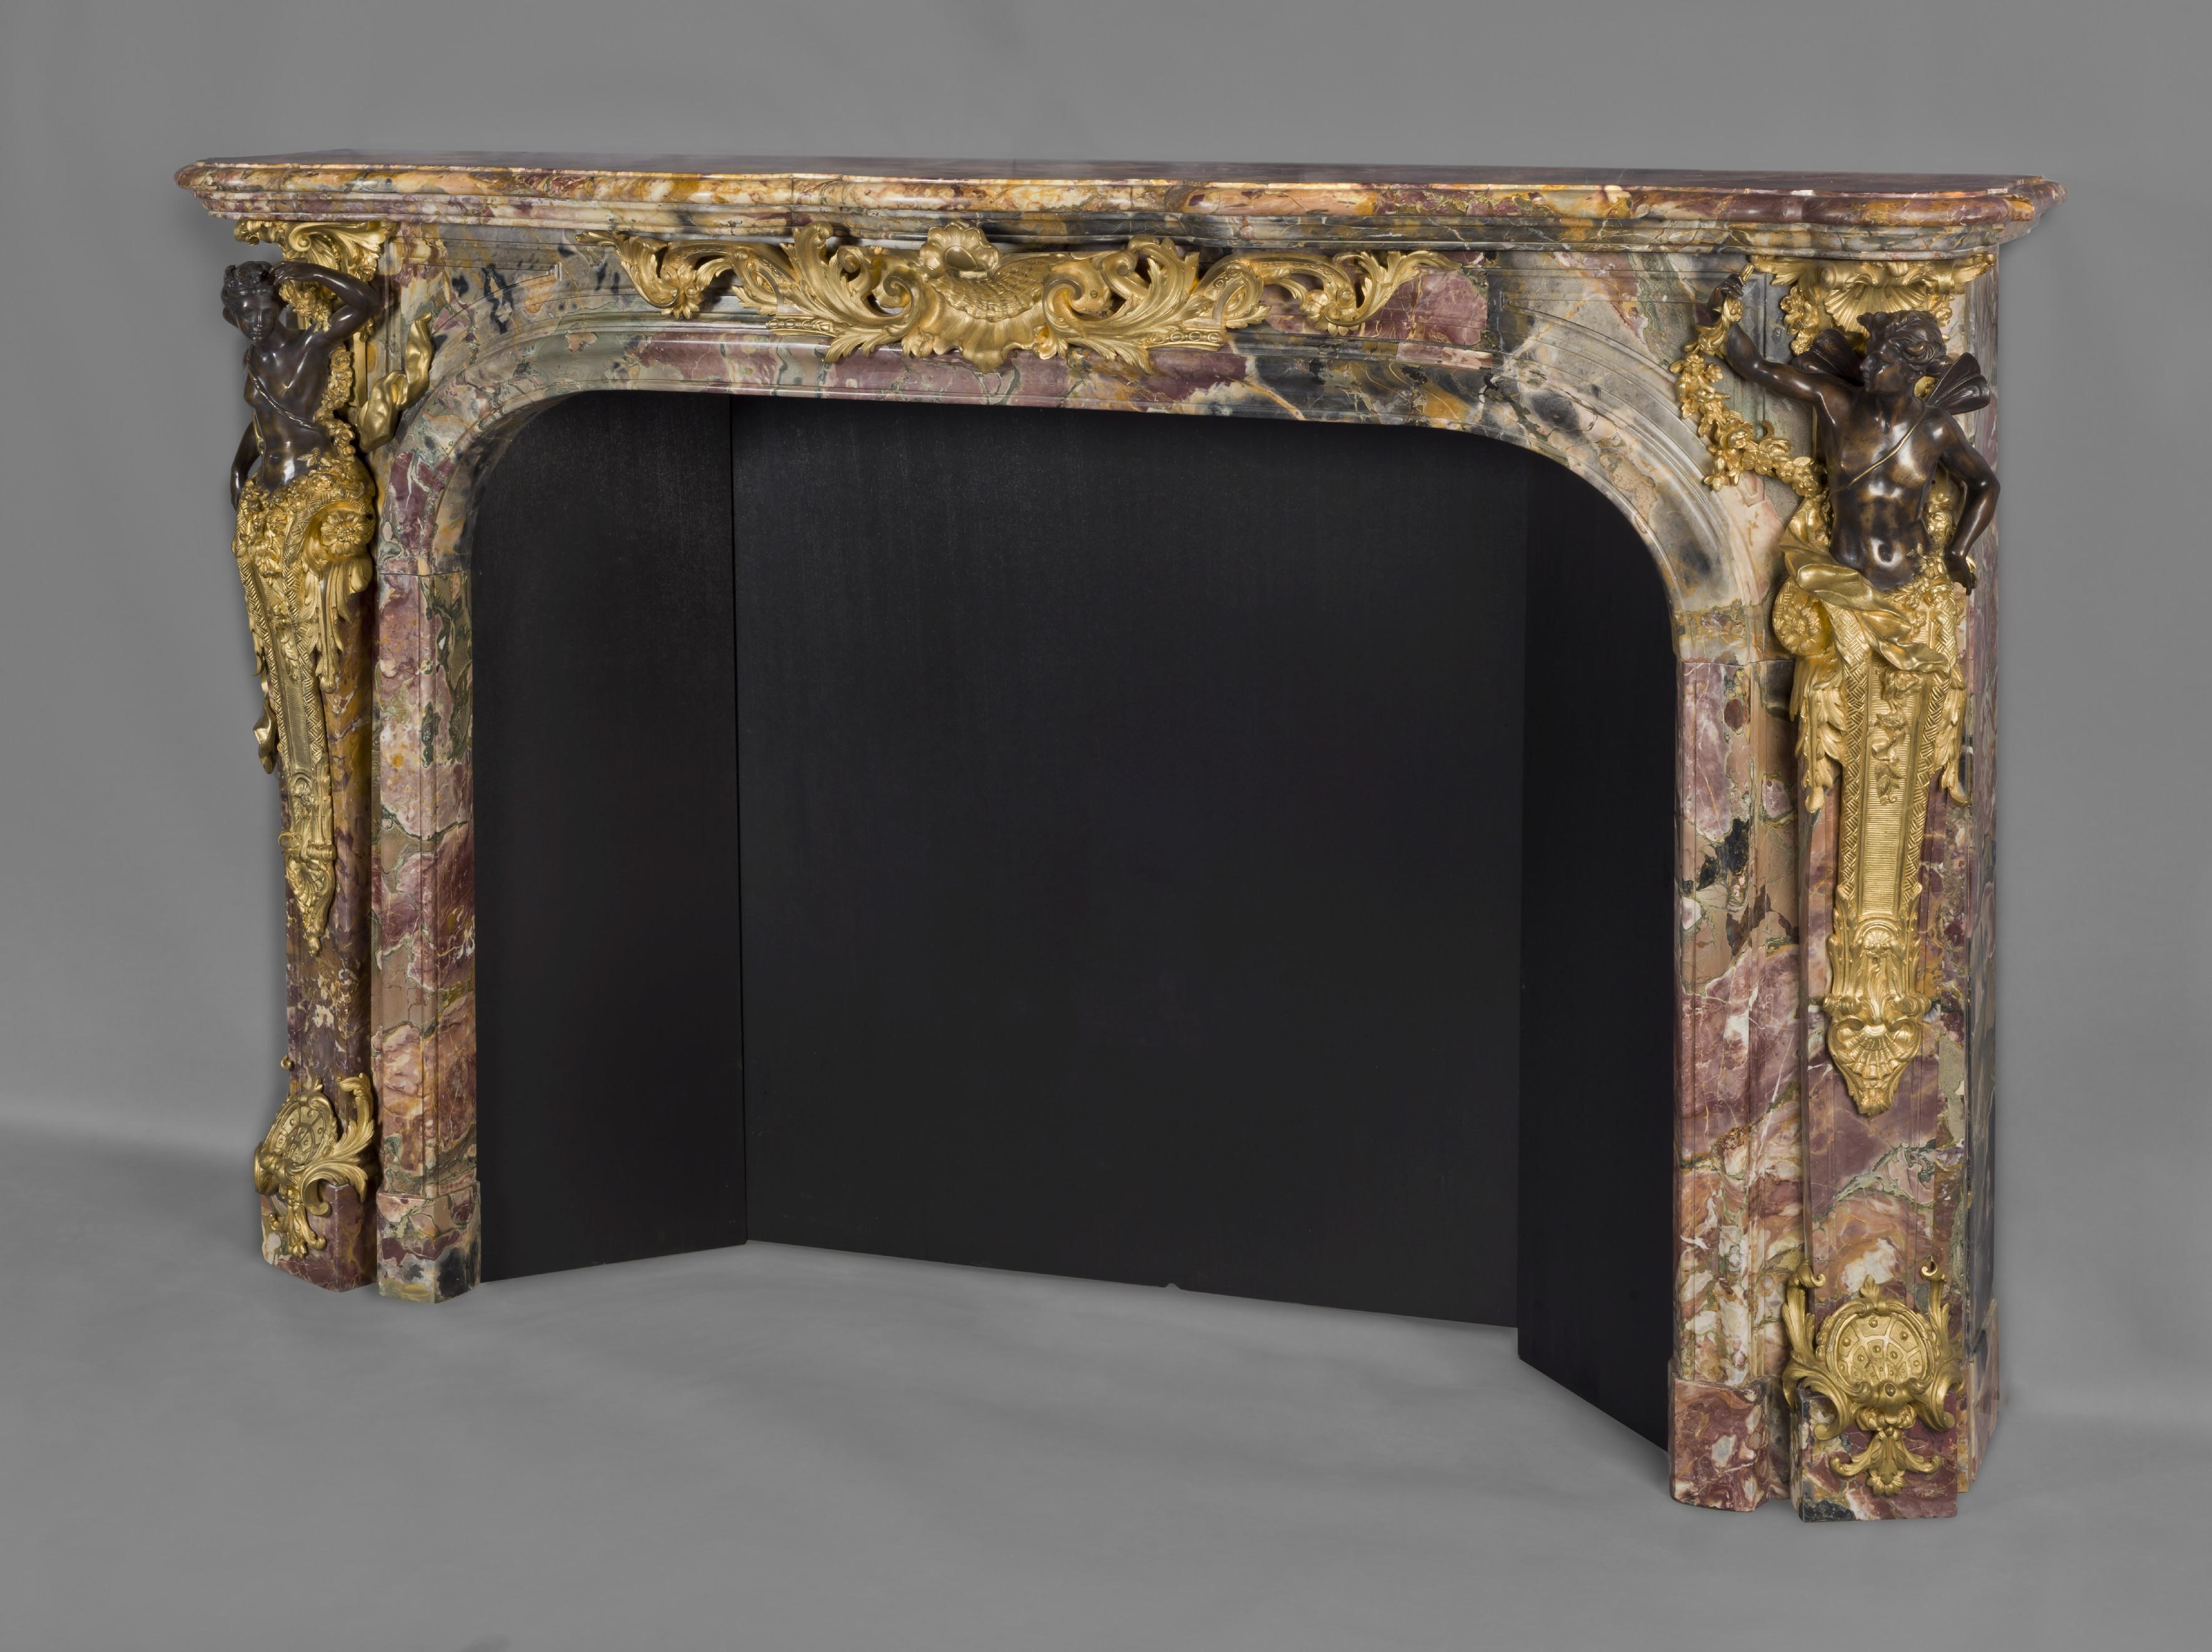 A fine louis XV style gilt and patinated bronze-mounted marble fireplace with mounts depicting Flora and Zephyr, after the model by Verberckt and Caffieri at Versailles. 

French, circa 1860. 

This rare and impressive fireplace has a serpentine